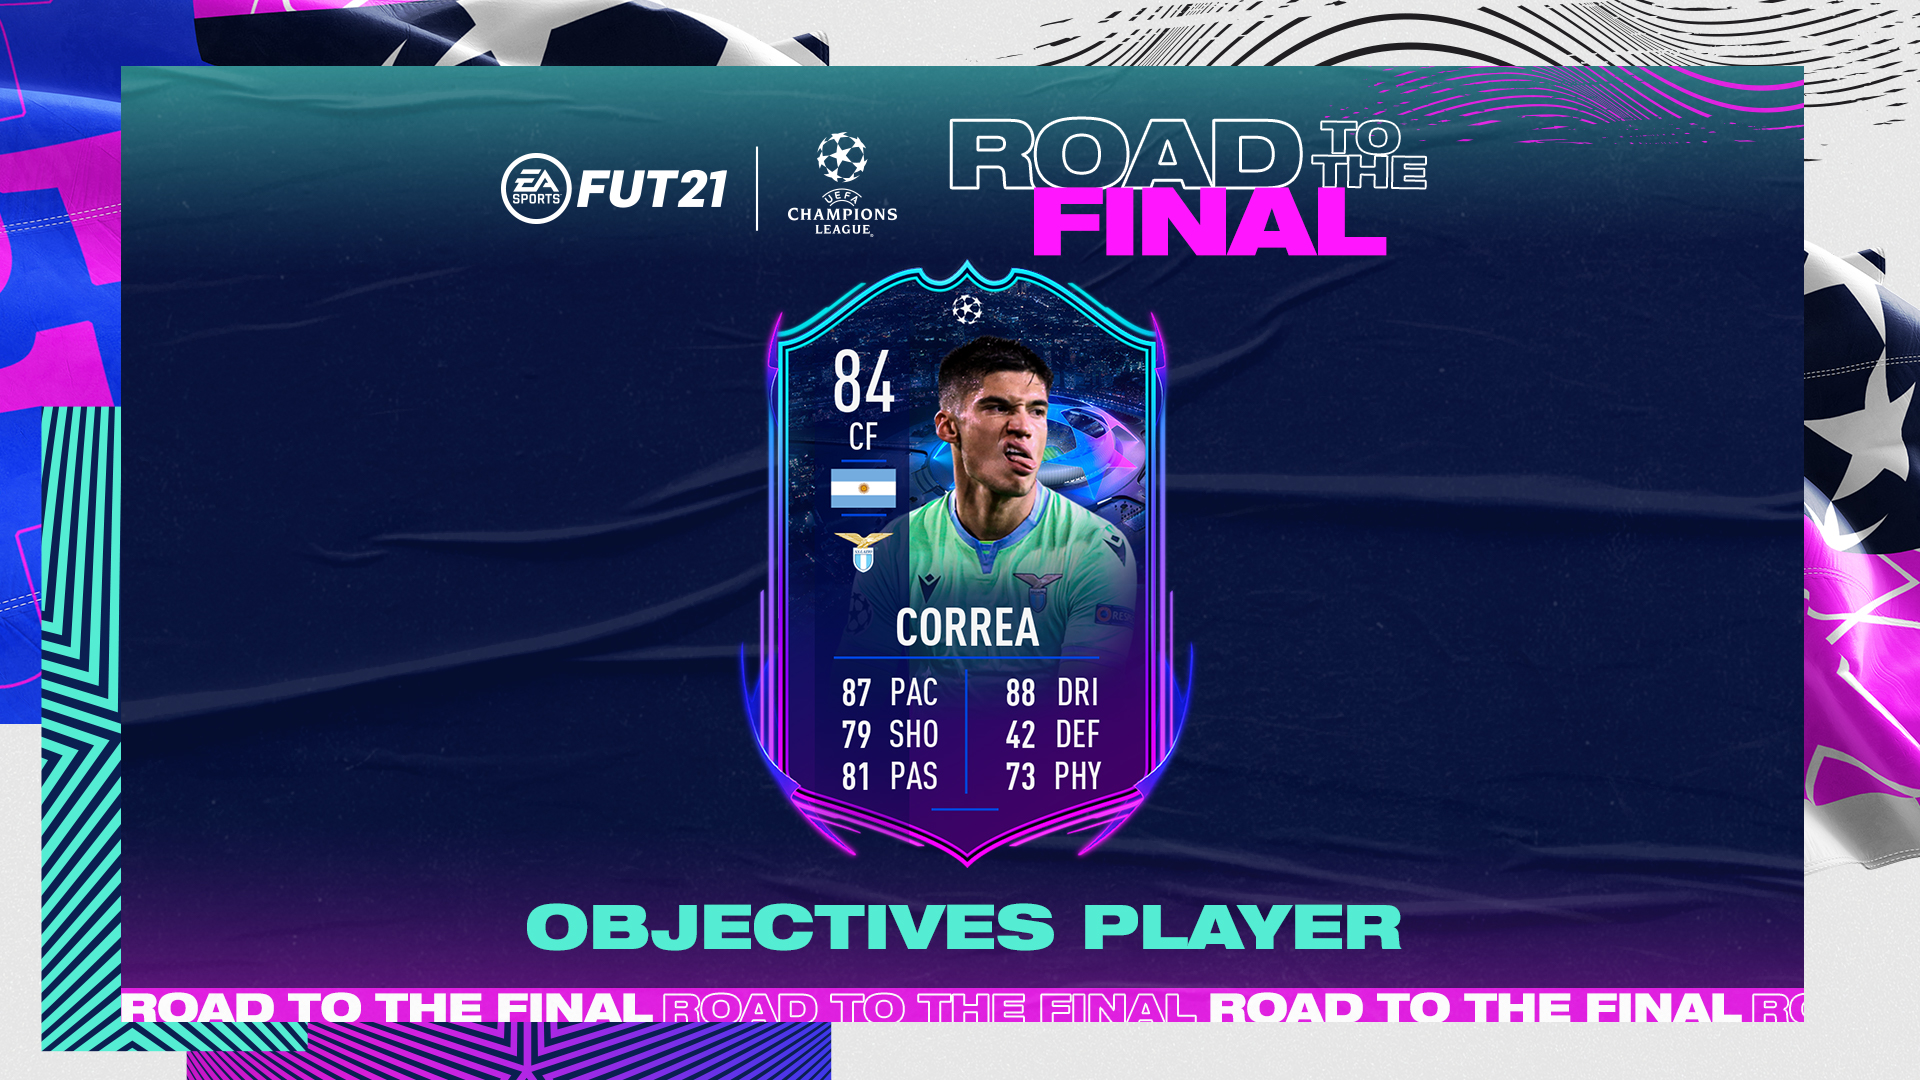 Fifa 22 News On Twitter The Latest Fifa21 Rttf Objective Is For None Other Than Lazio S Tucu Correa